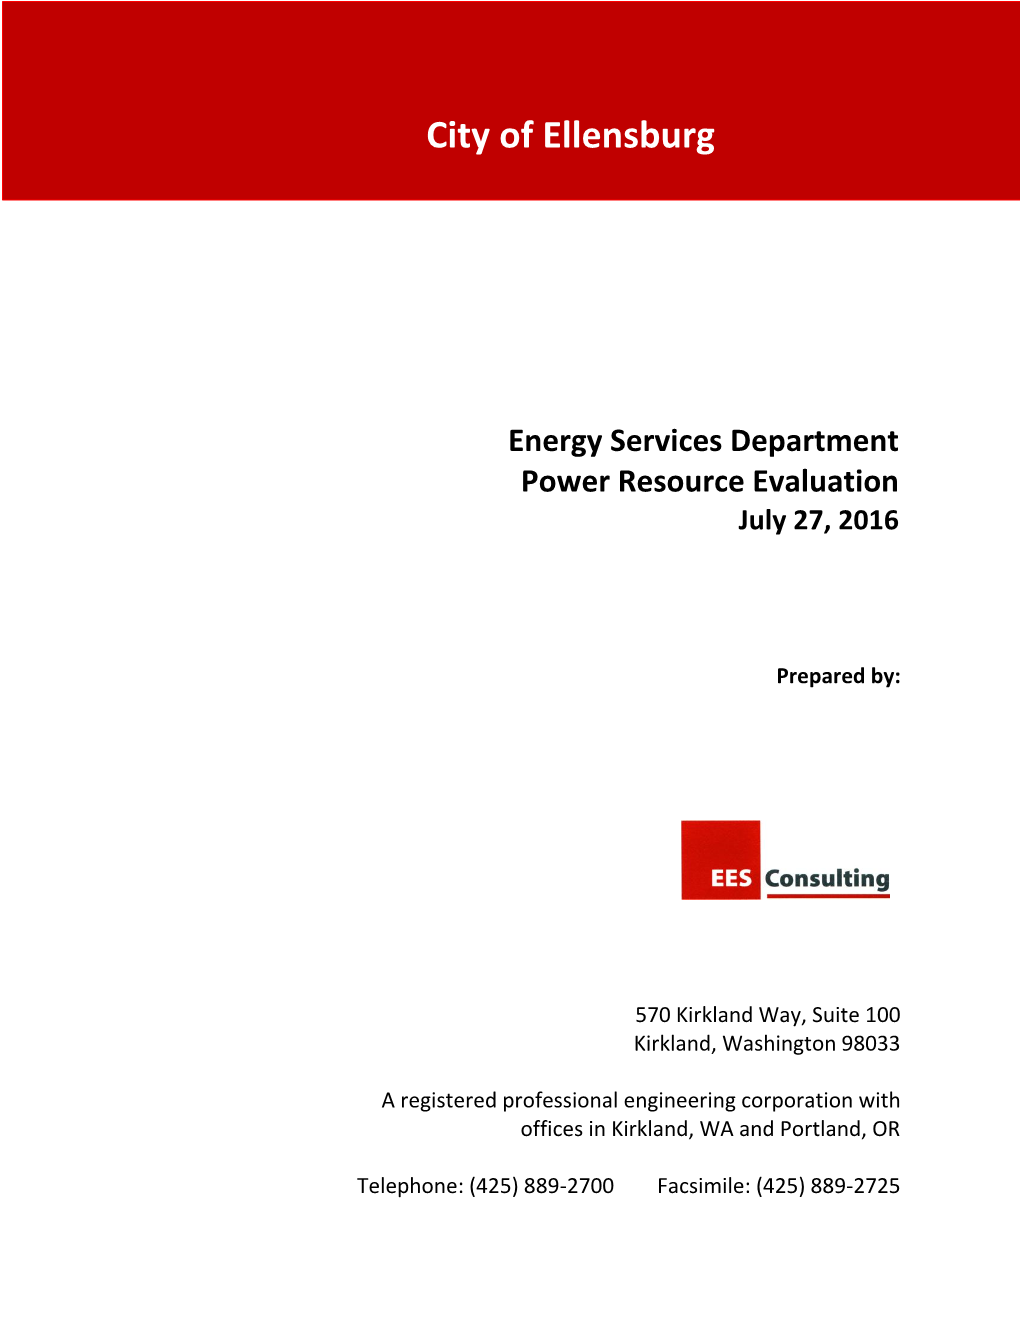 Energy Services Department Power Resource Evaluation July 27, 2016